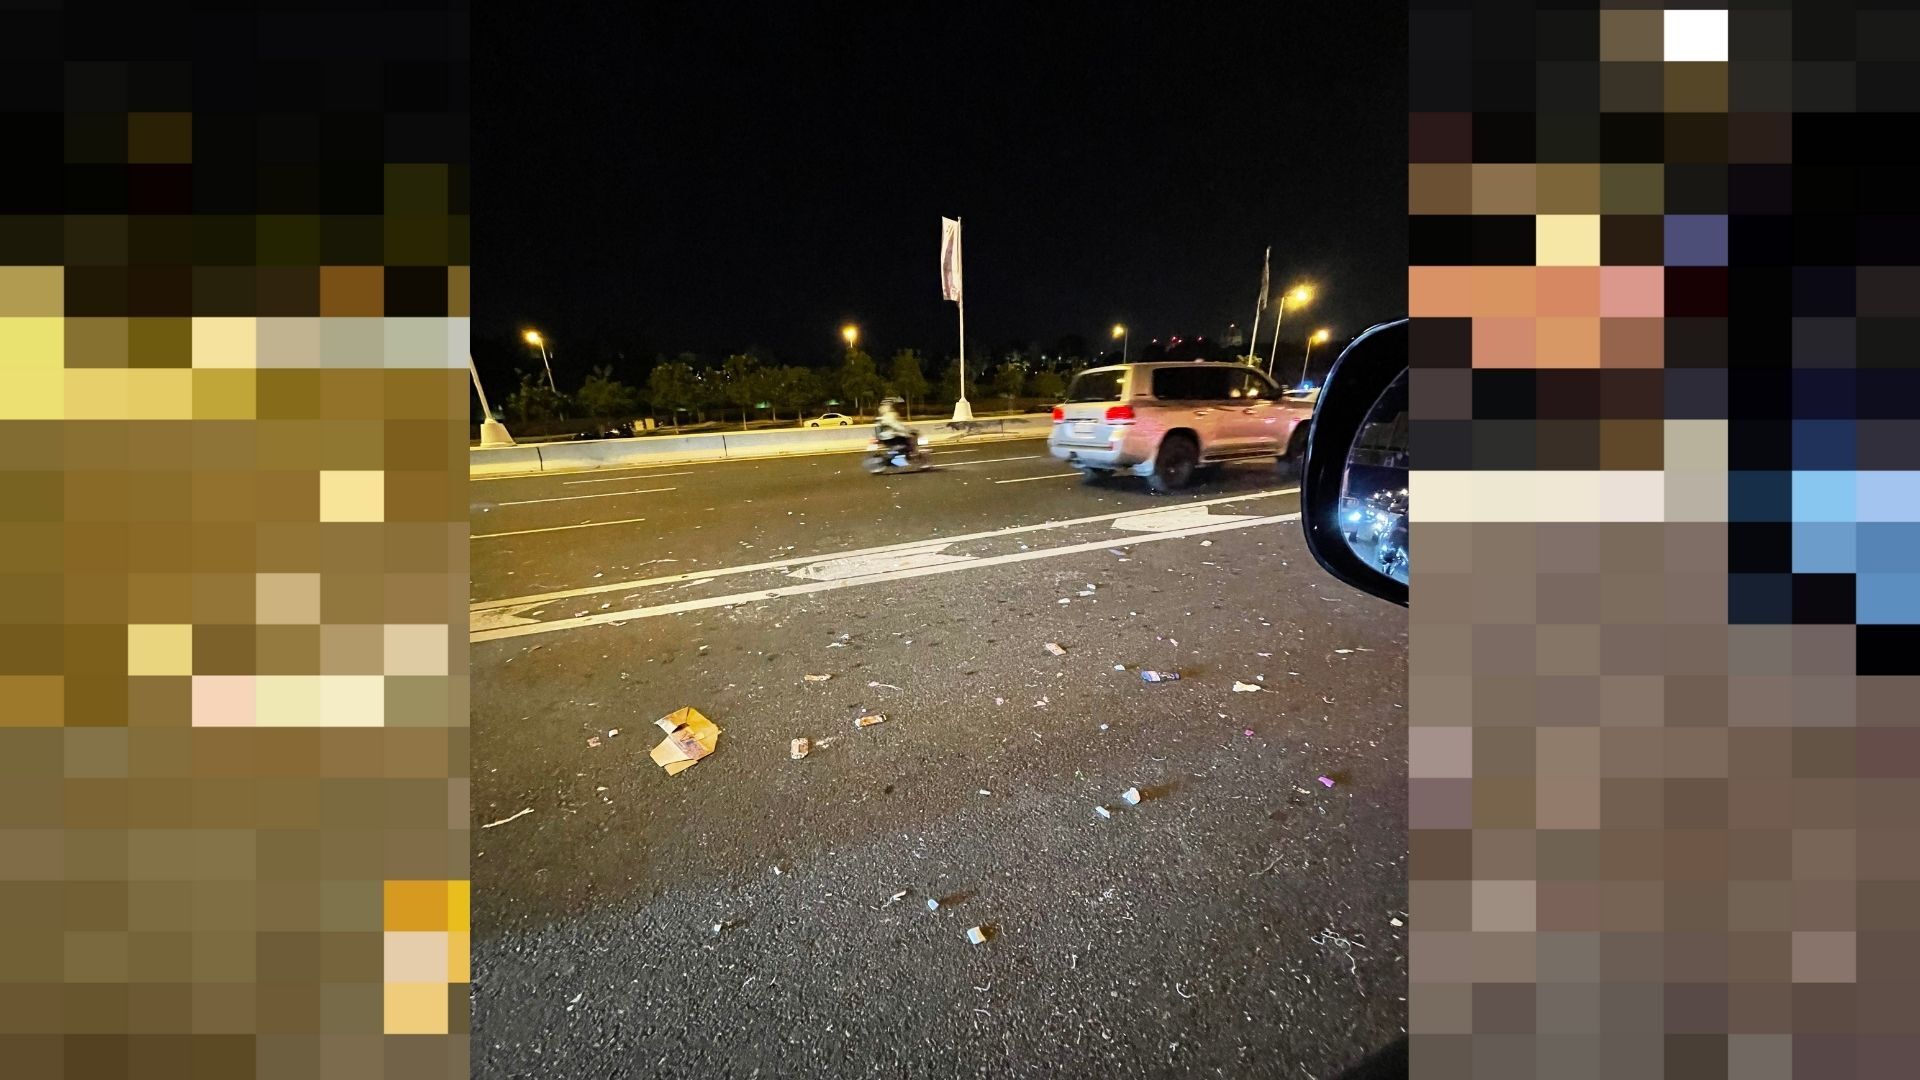 Katara vows legal action for vandalism amid outrage over national day littering